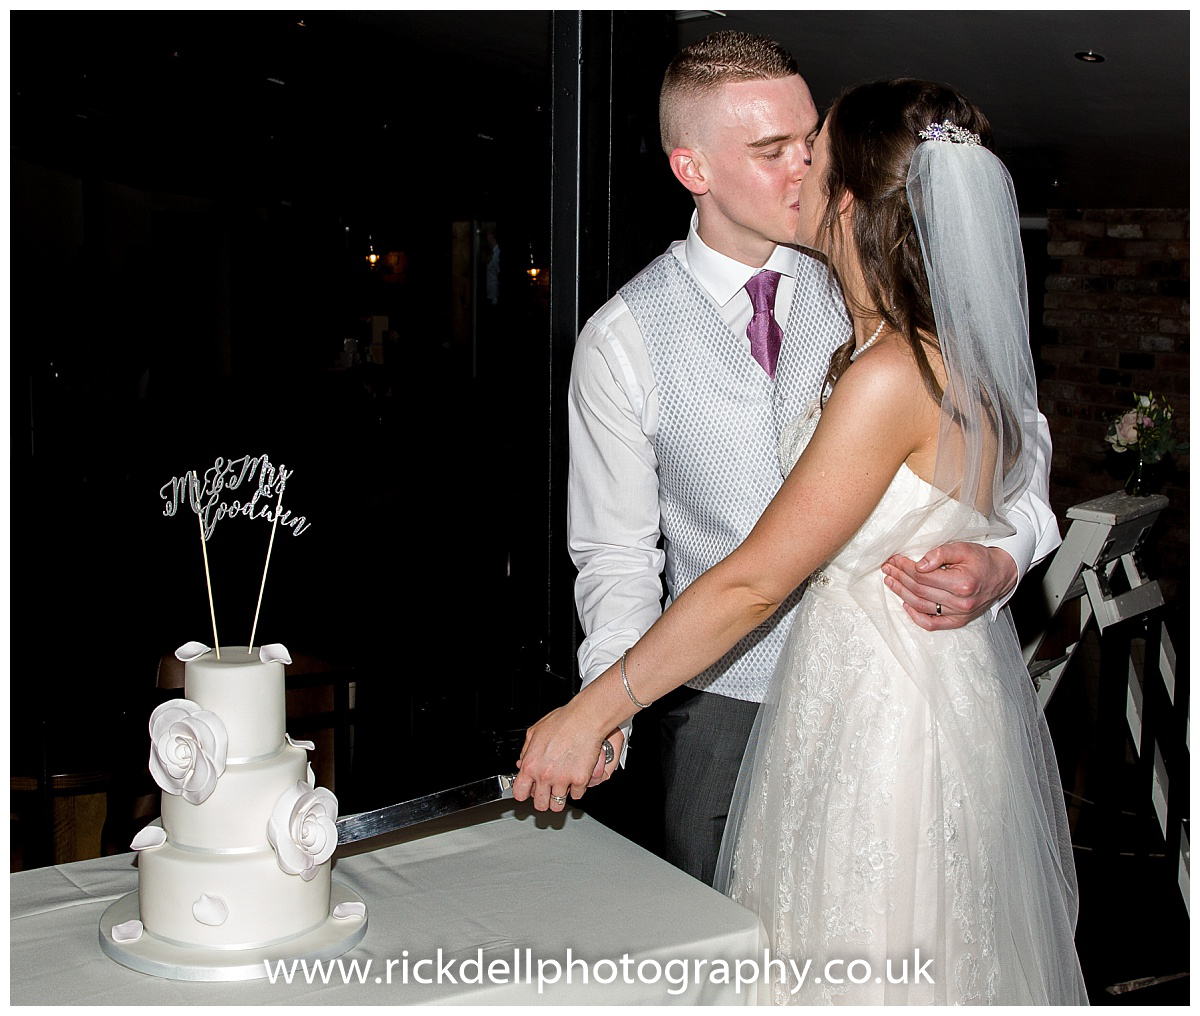 Wedding Photography Manchester - Tamsyn and Jamie's Hyde Bank Farm Wedding Day 86